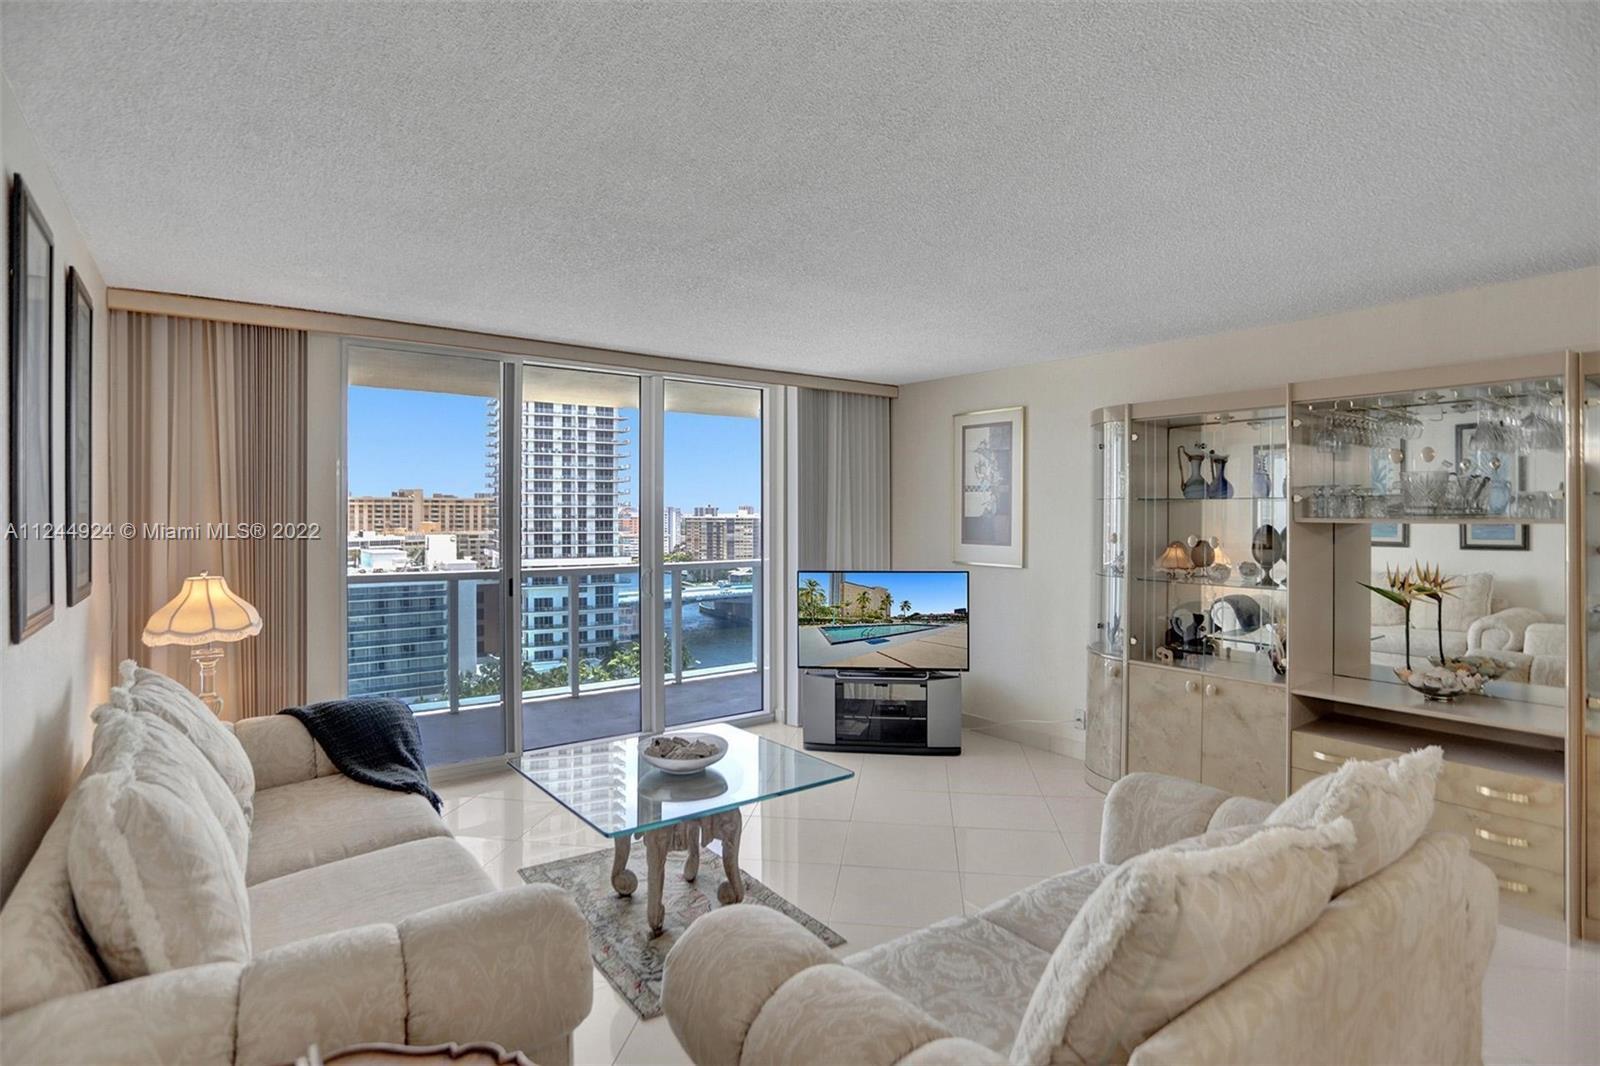 Unique Opportunity in the well-known and remodeled Hallmark on Hollywood Beach.  This 2 bed-2 bath c